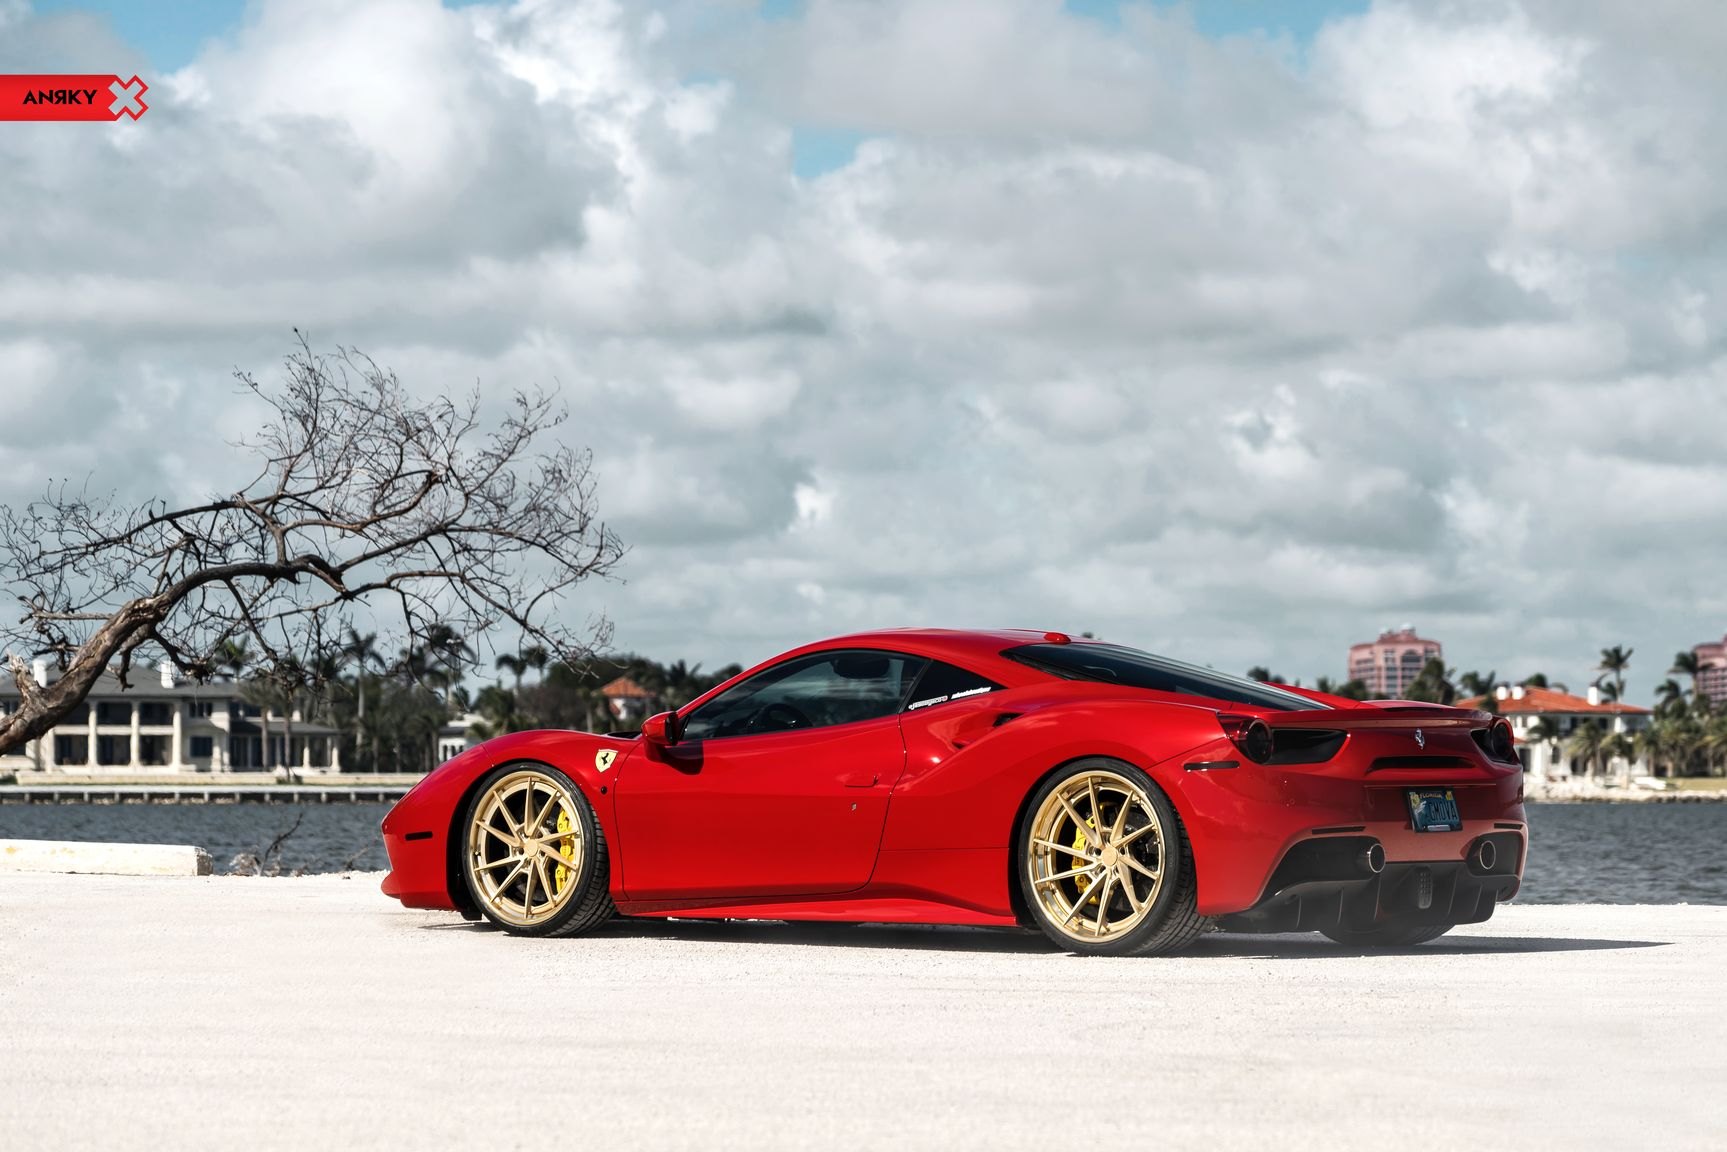 Red Ferrari 488 with Aftermarket Rear Diffuser - Photo by Anrky Wheels